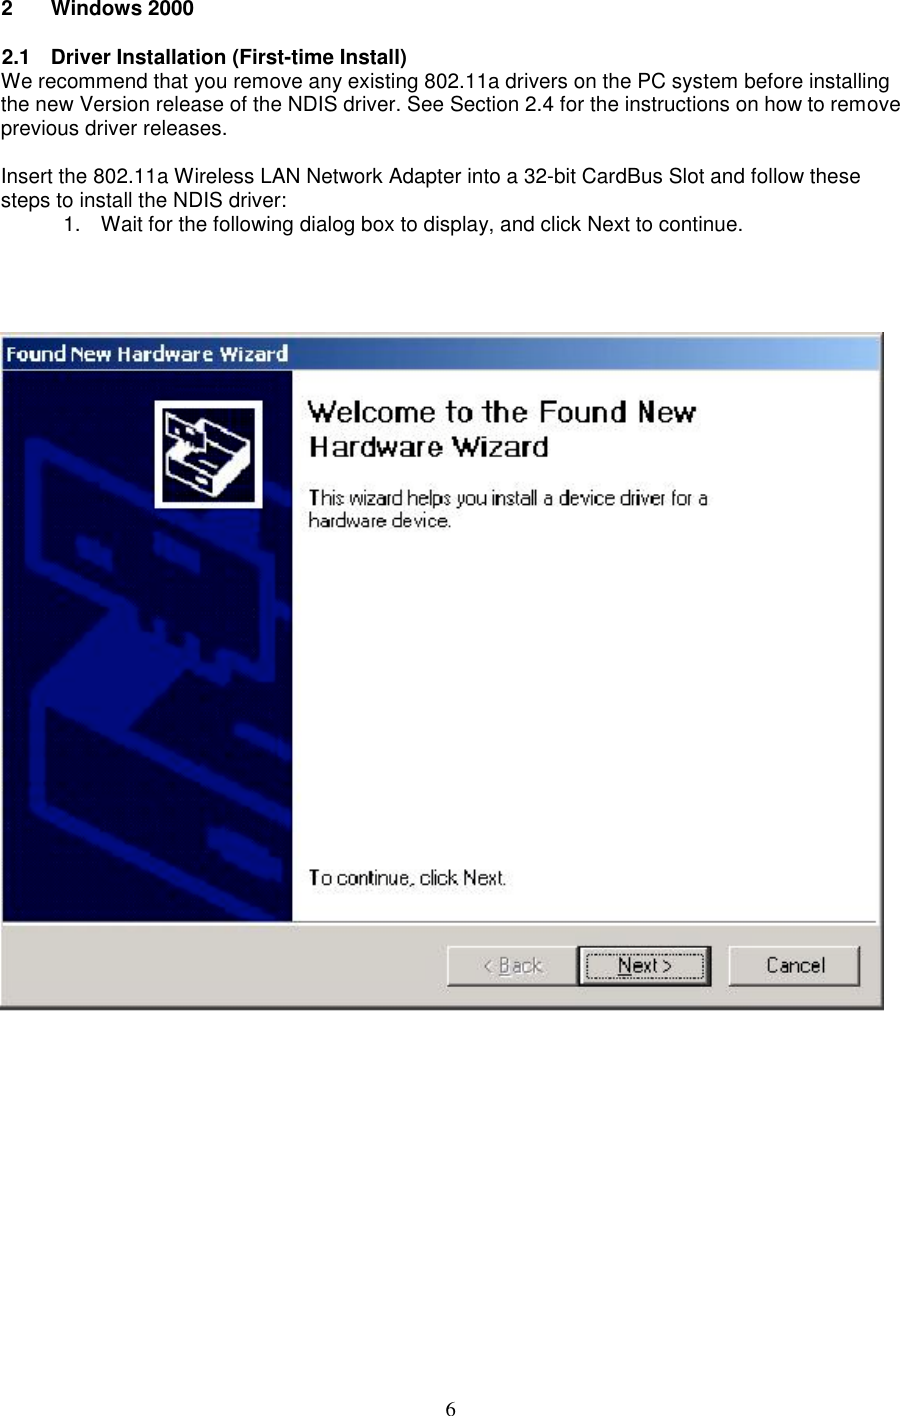 62 Windows 20002.1 Driver Installation (First-time Install)We recommend that you remove any existing 802.11a drivers on the PC system before installingthe new Version release of the NDIS driver. See Section 2.4 for the instructions on how to removeprevious driver releases.Insert the 802.11a Wireless LAN Network Adapter into a 32-bit CardBus Slot and follow thesesteps to install the NDIS driver:1. Wait for the following dialog box to display, and click Next to continue.